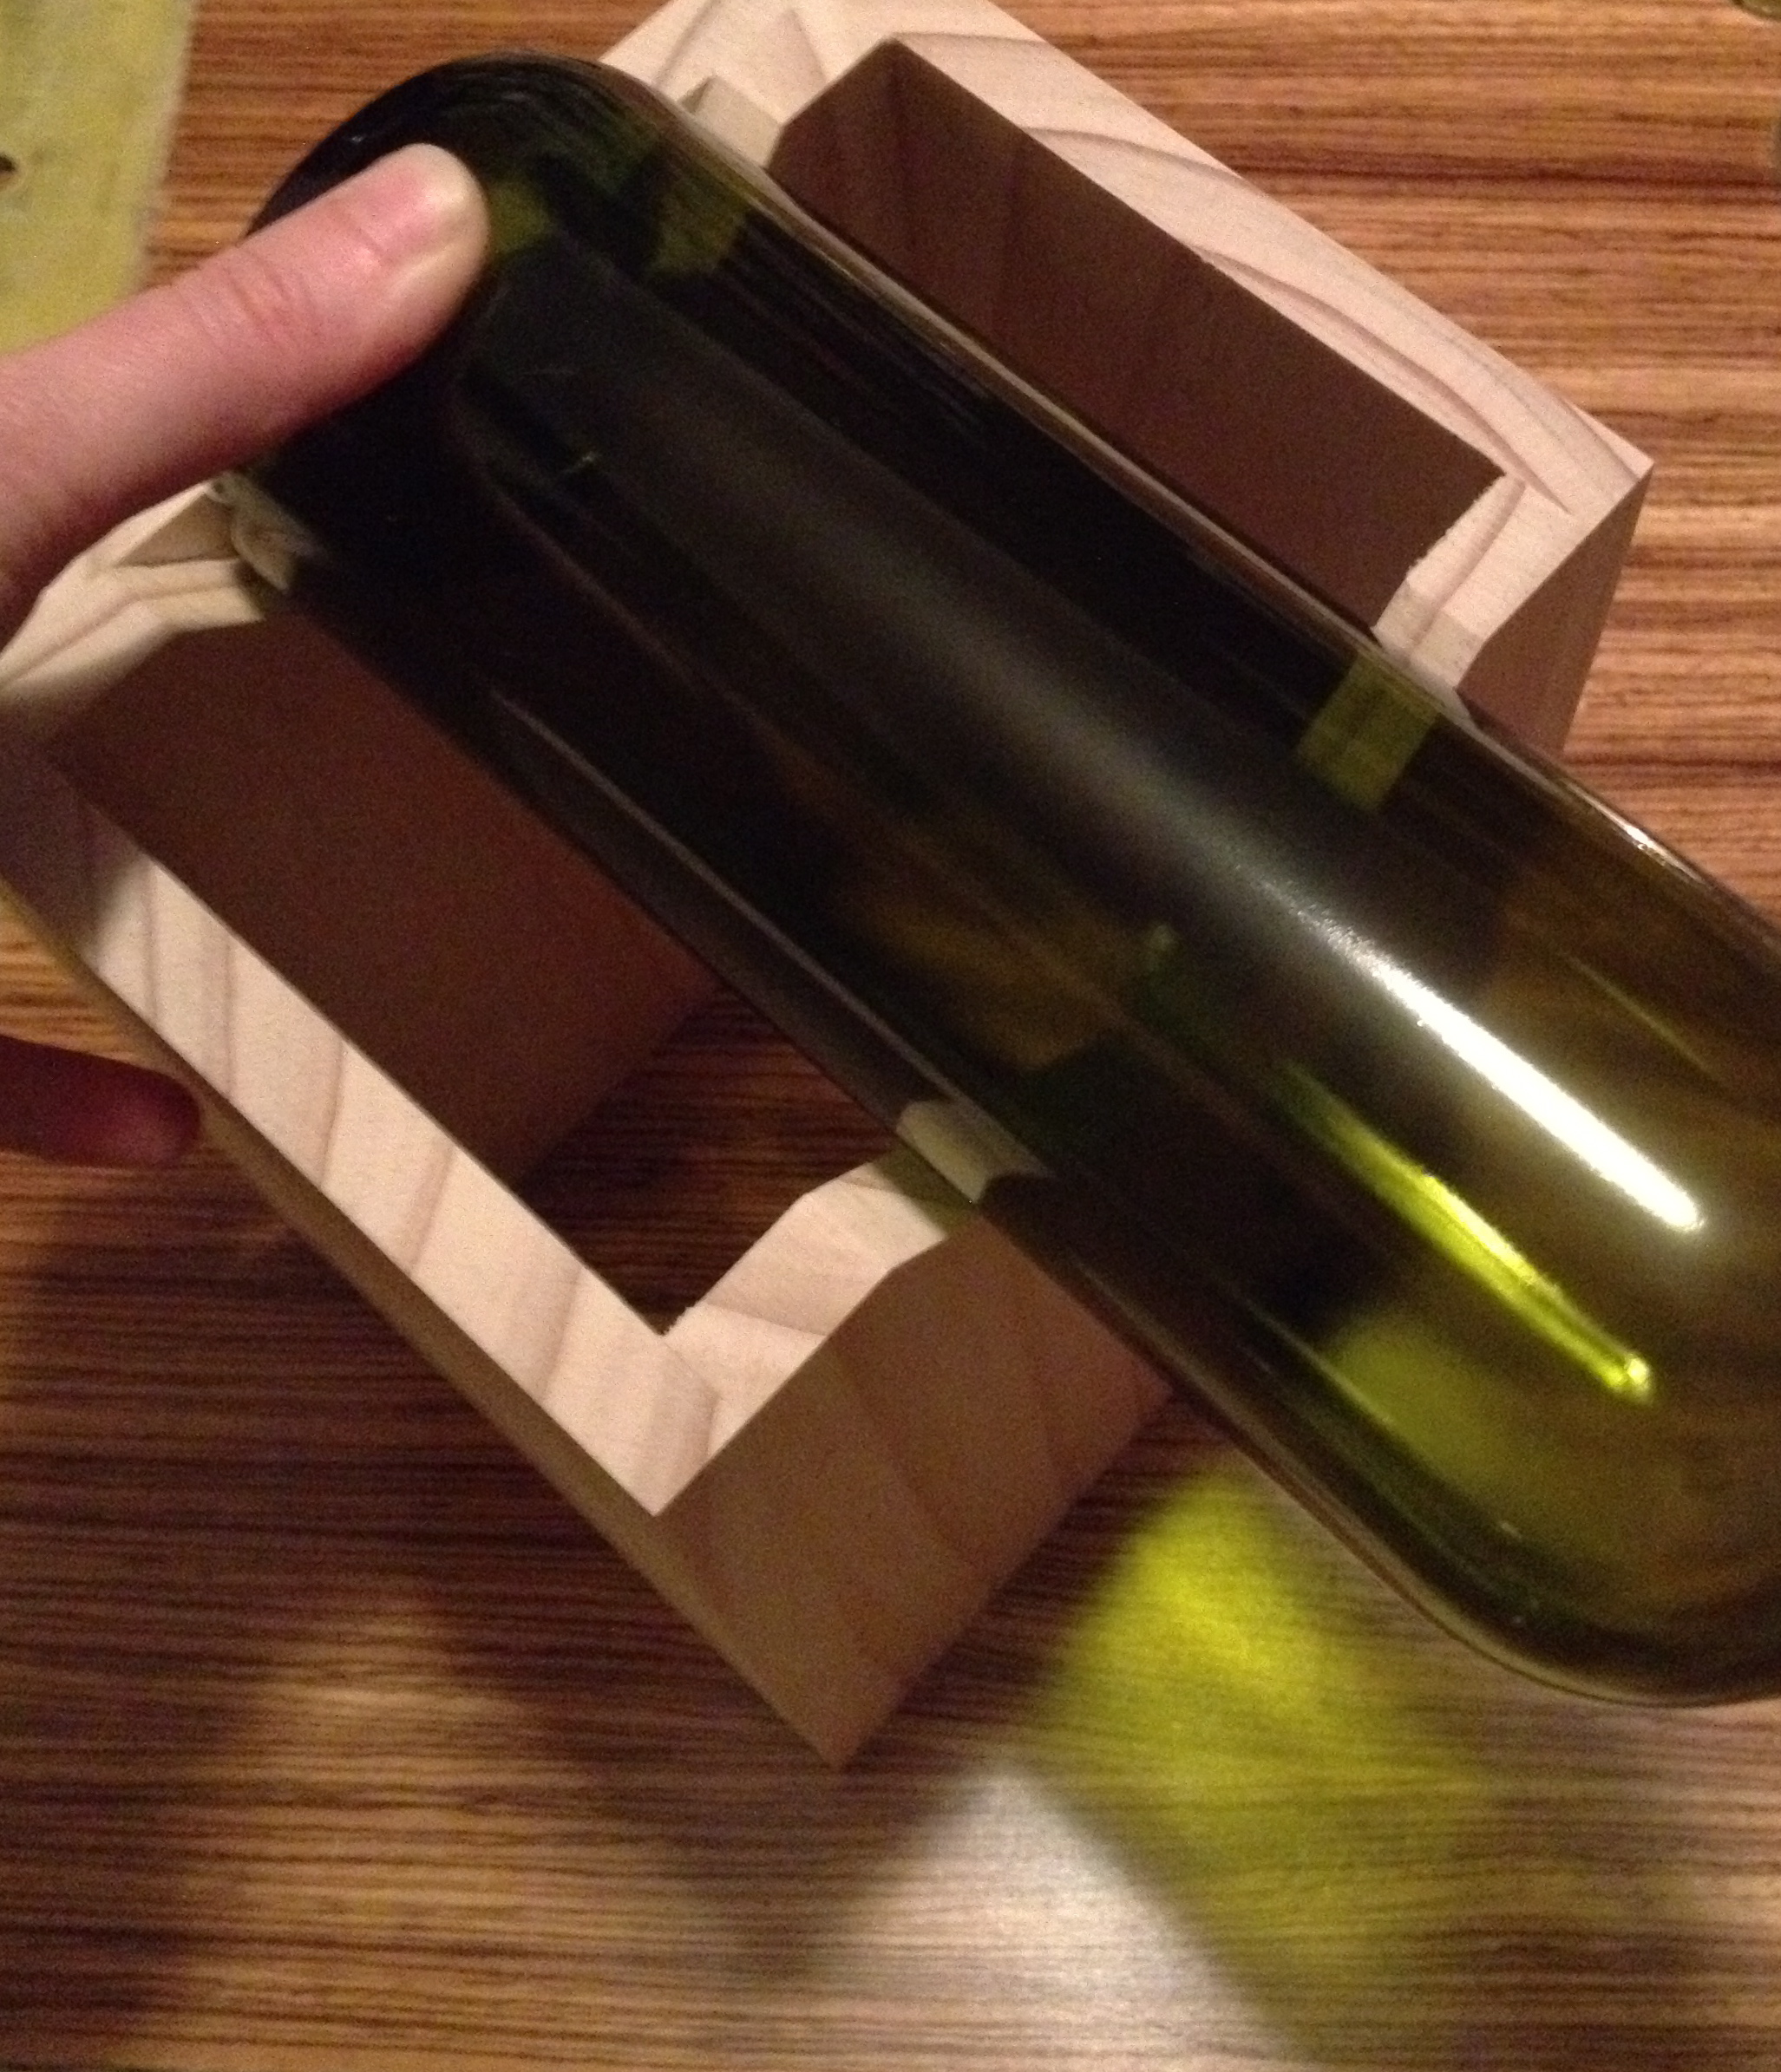 Want to cut wine bottles?  Build this jig!